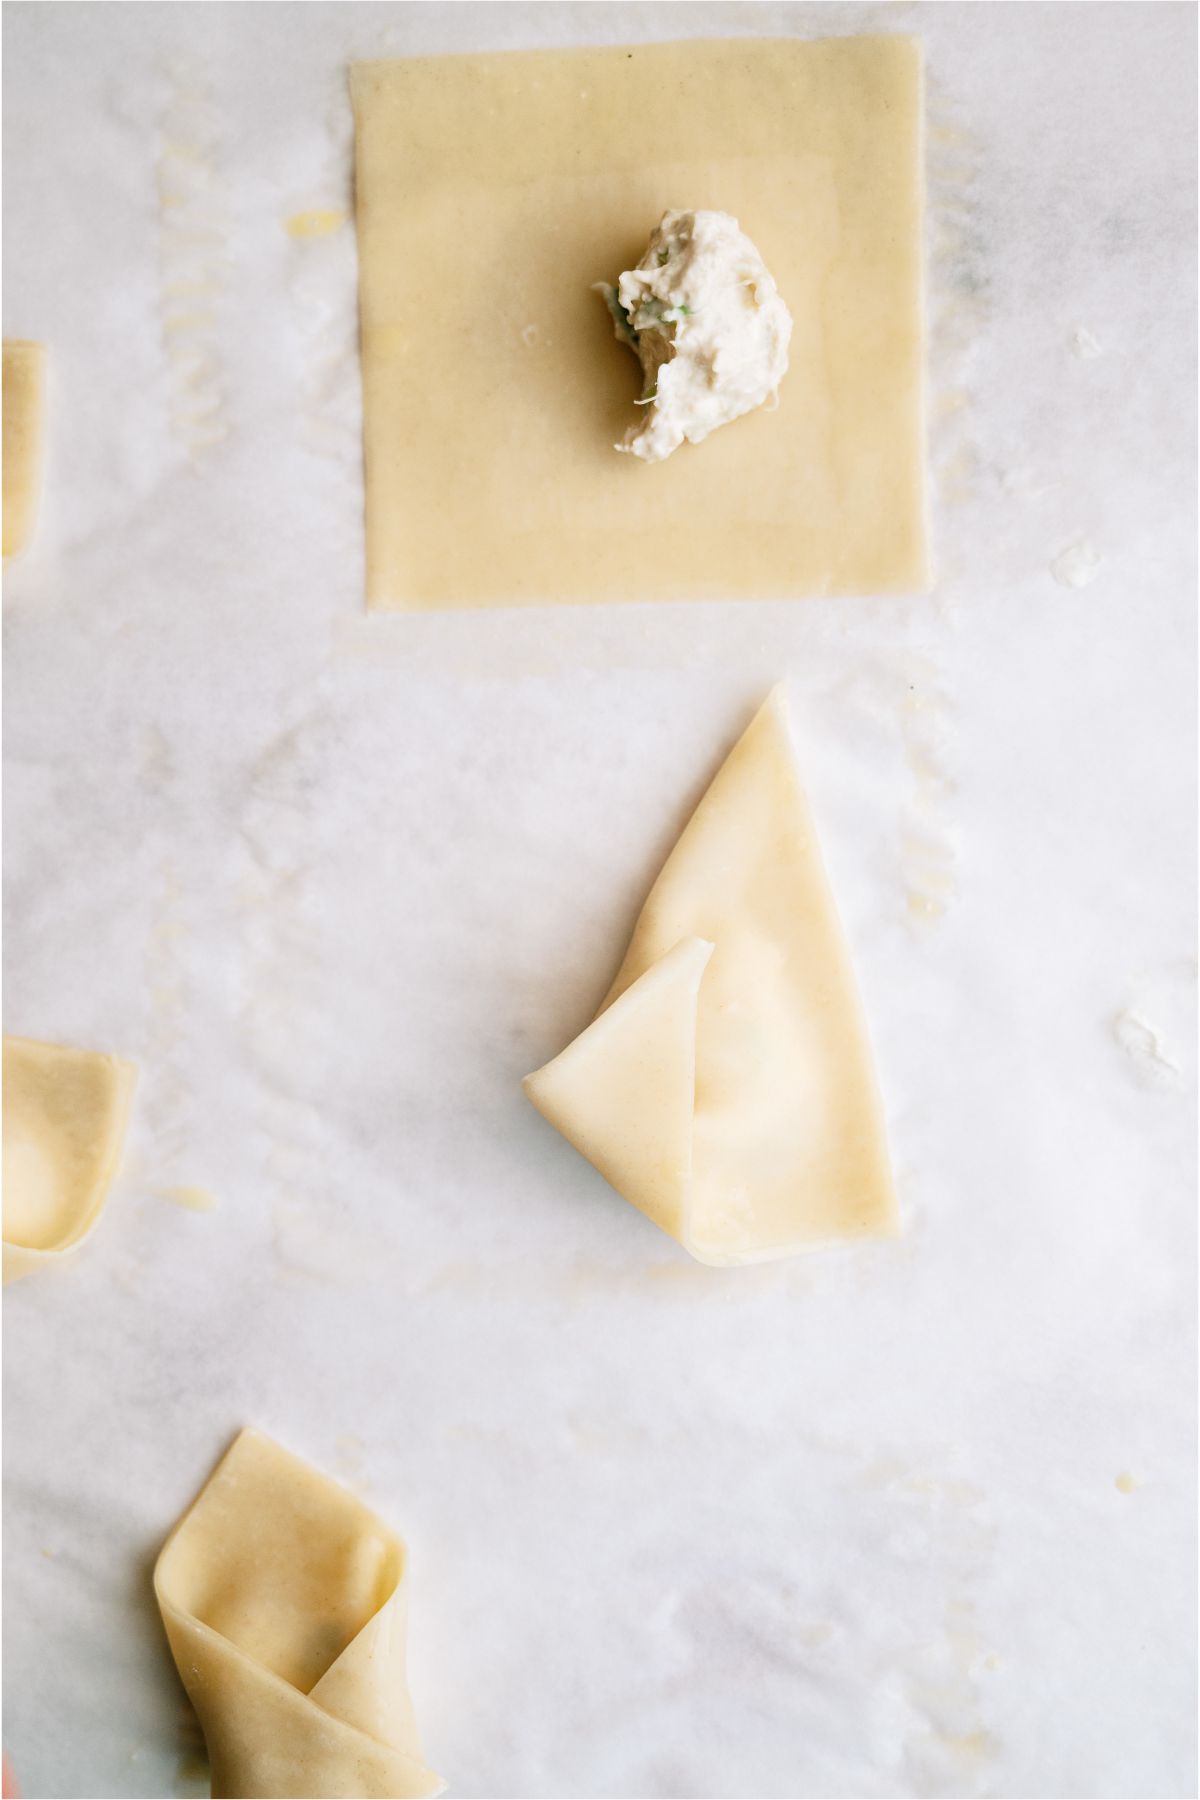 Stages of folding the wonton wrapper into a Baked Crab Rangoon